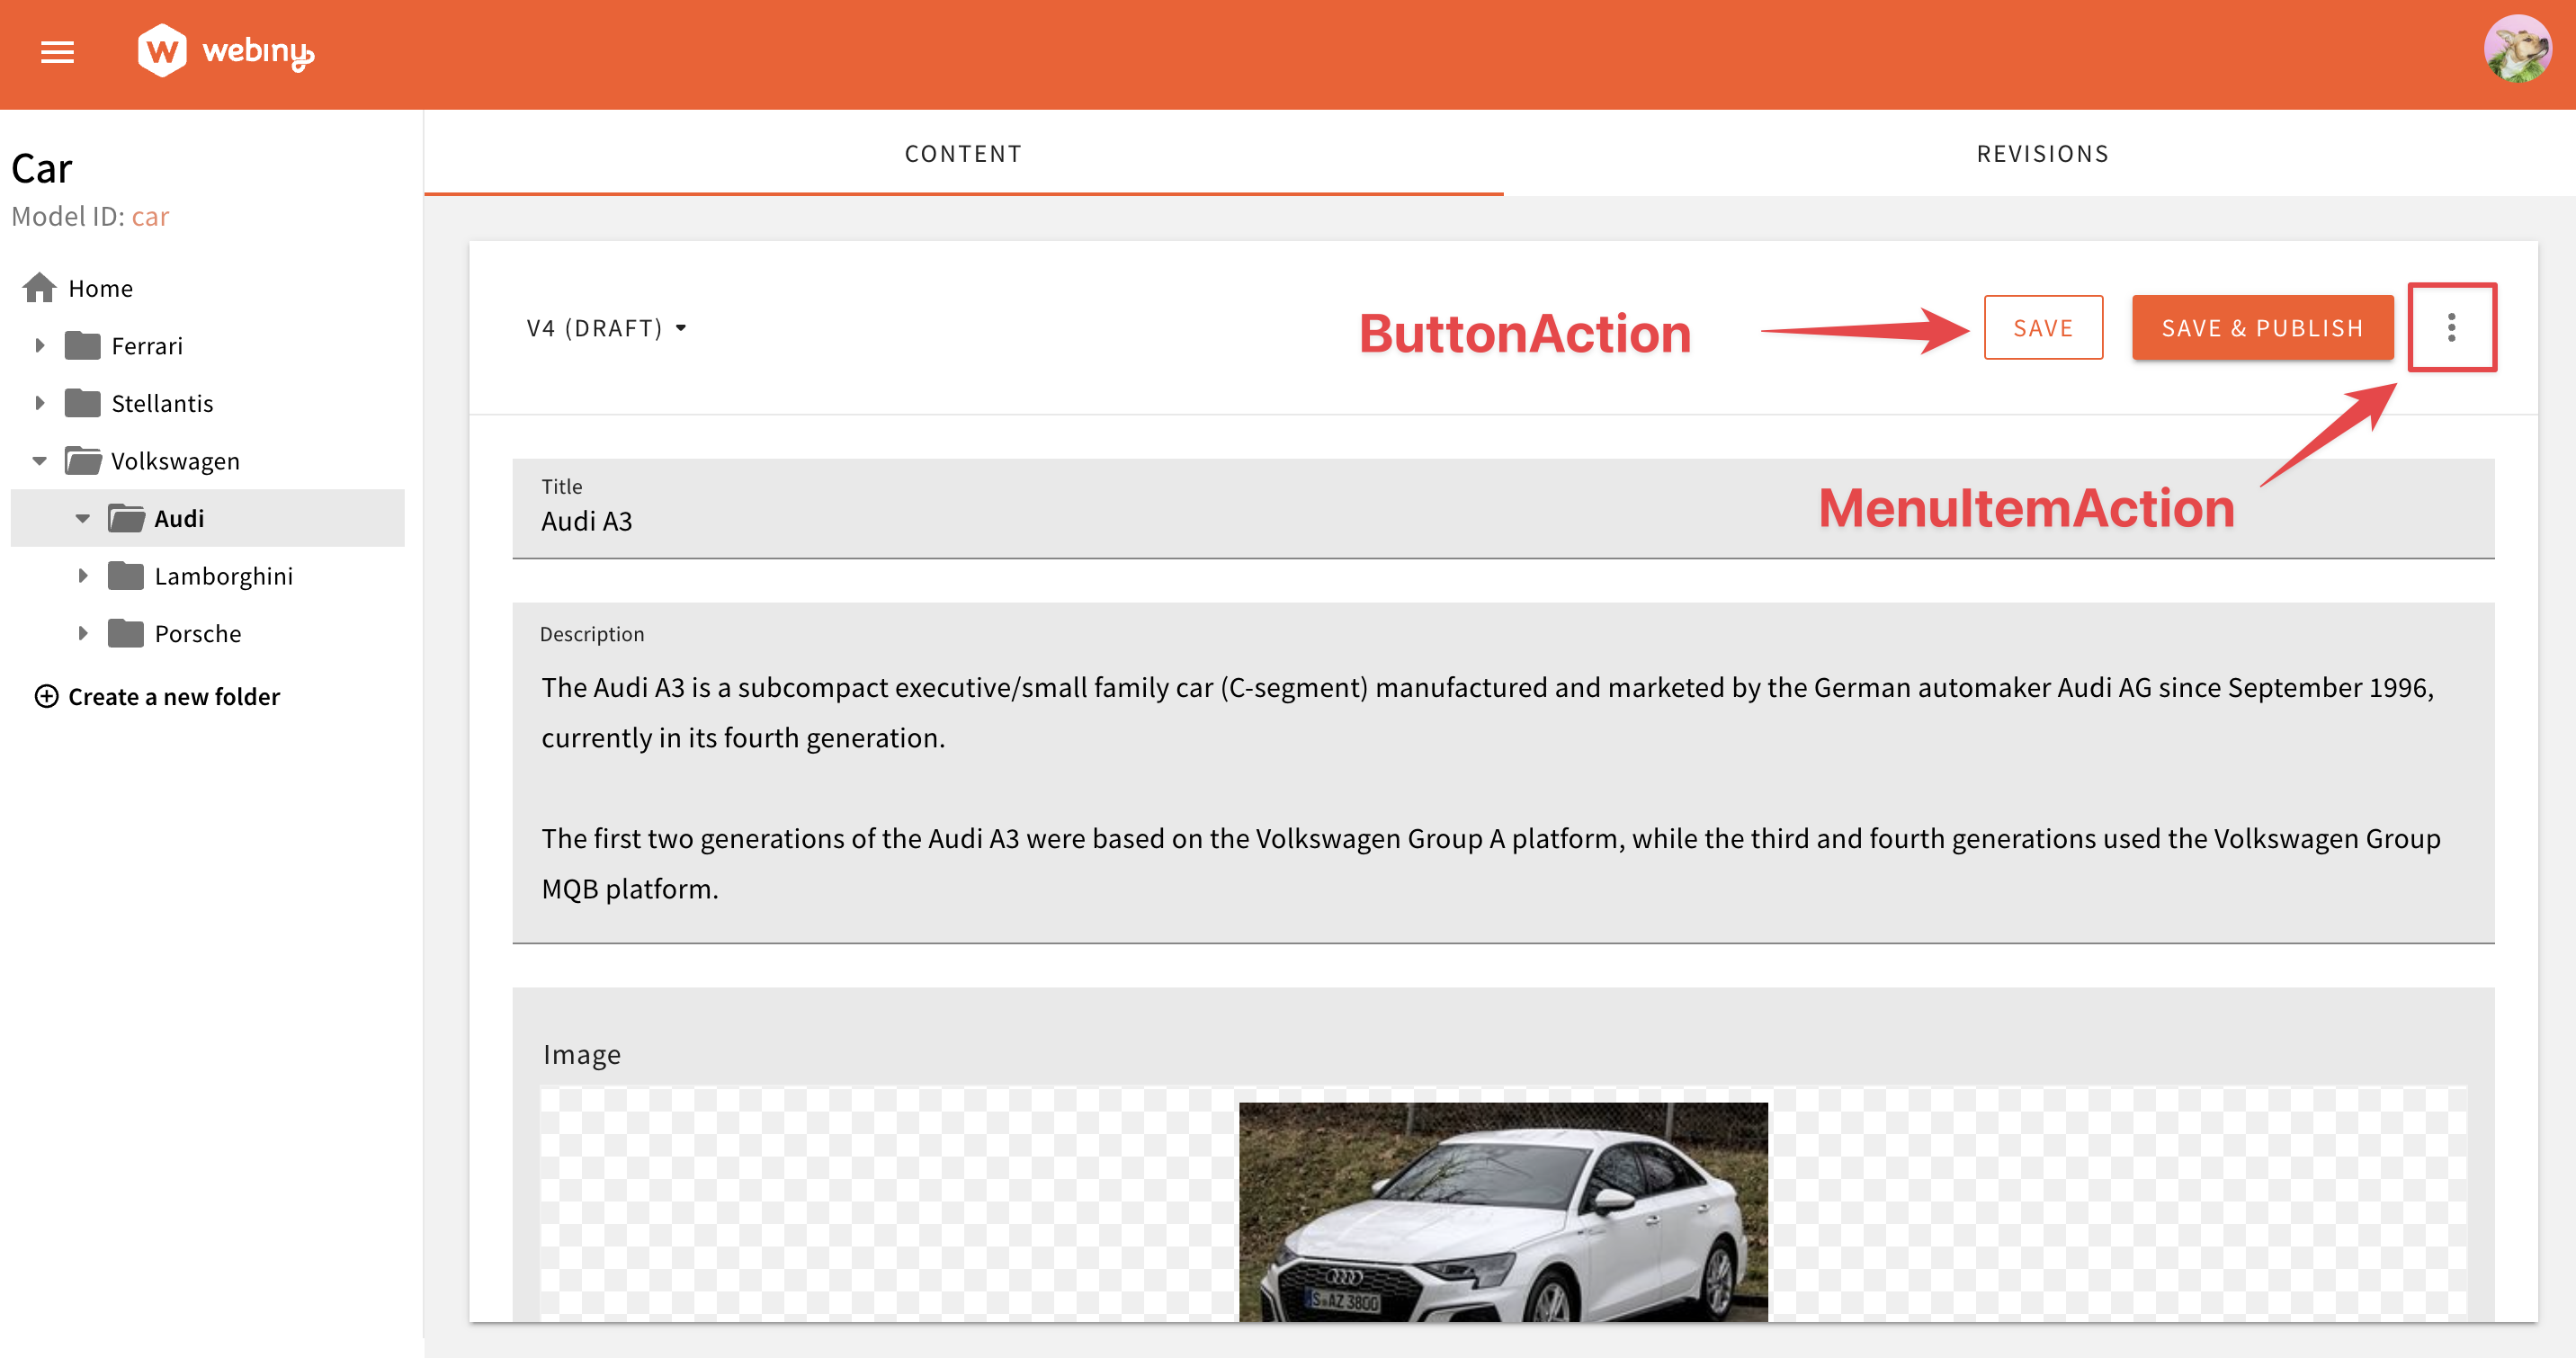 Overview built-in actions